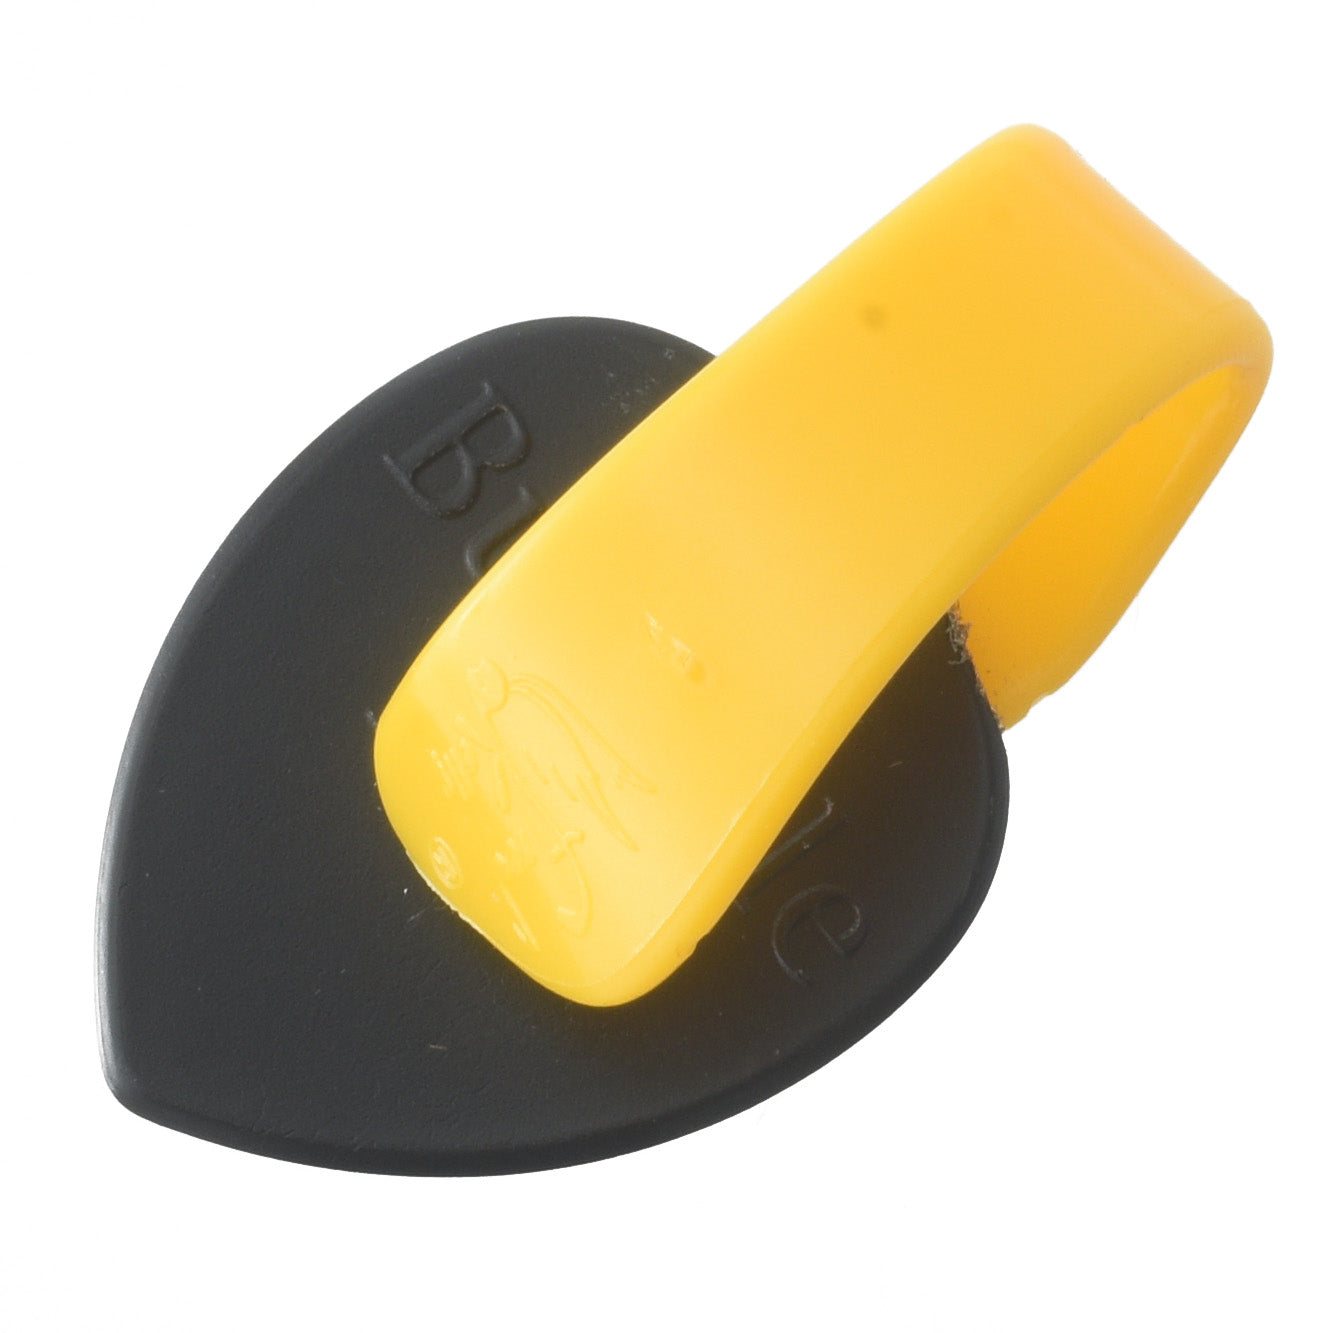 Image 3 of Fred Kelly Extra-Heavy Gauge Delrin Large Bumblebee Teardrop Pick - SKU# PKBTLG-XH : Product Type Accessories & Parts : Elderly Instruments